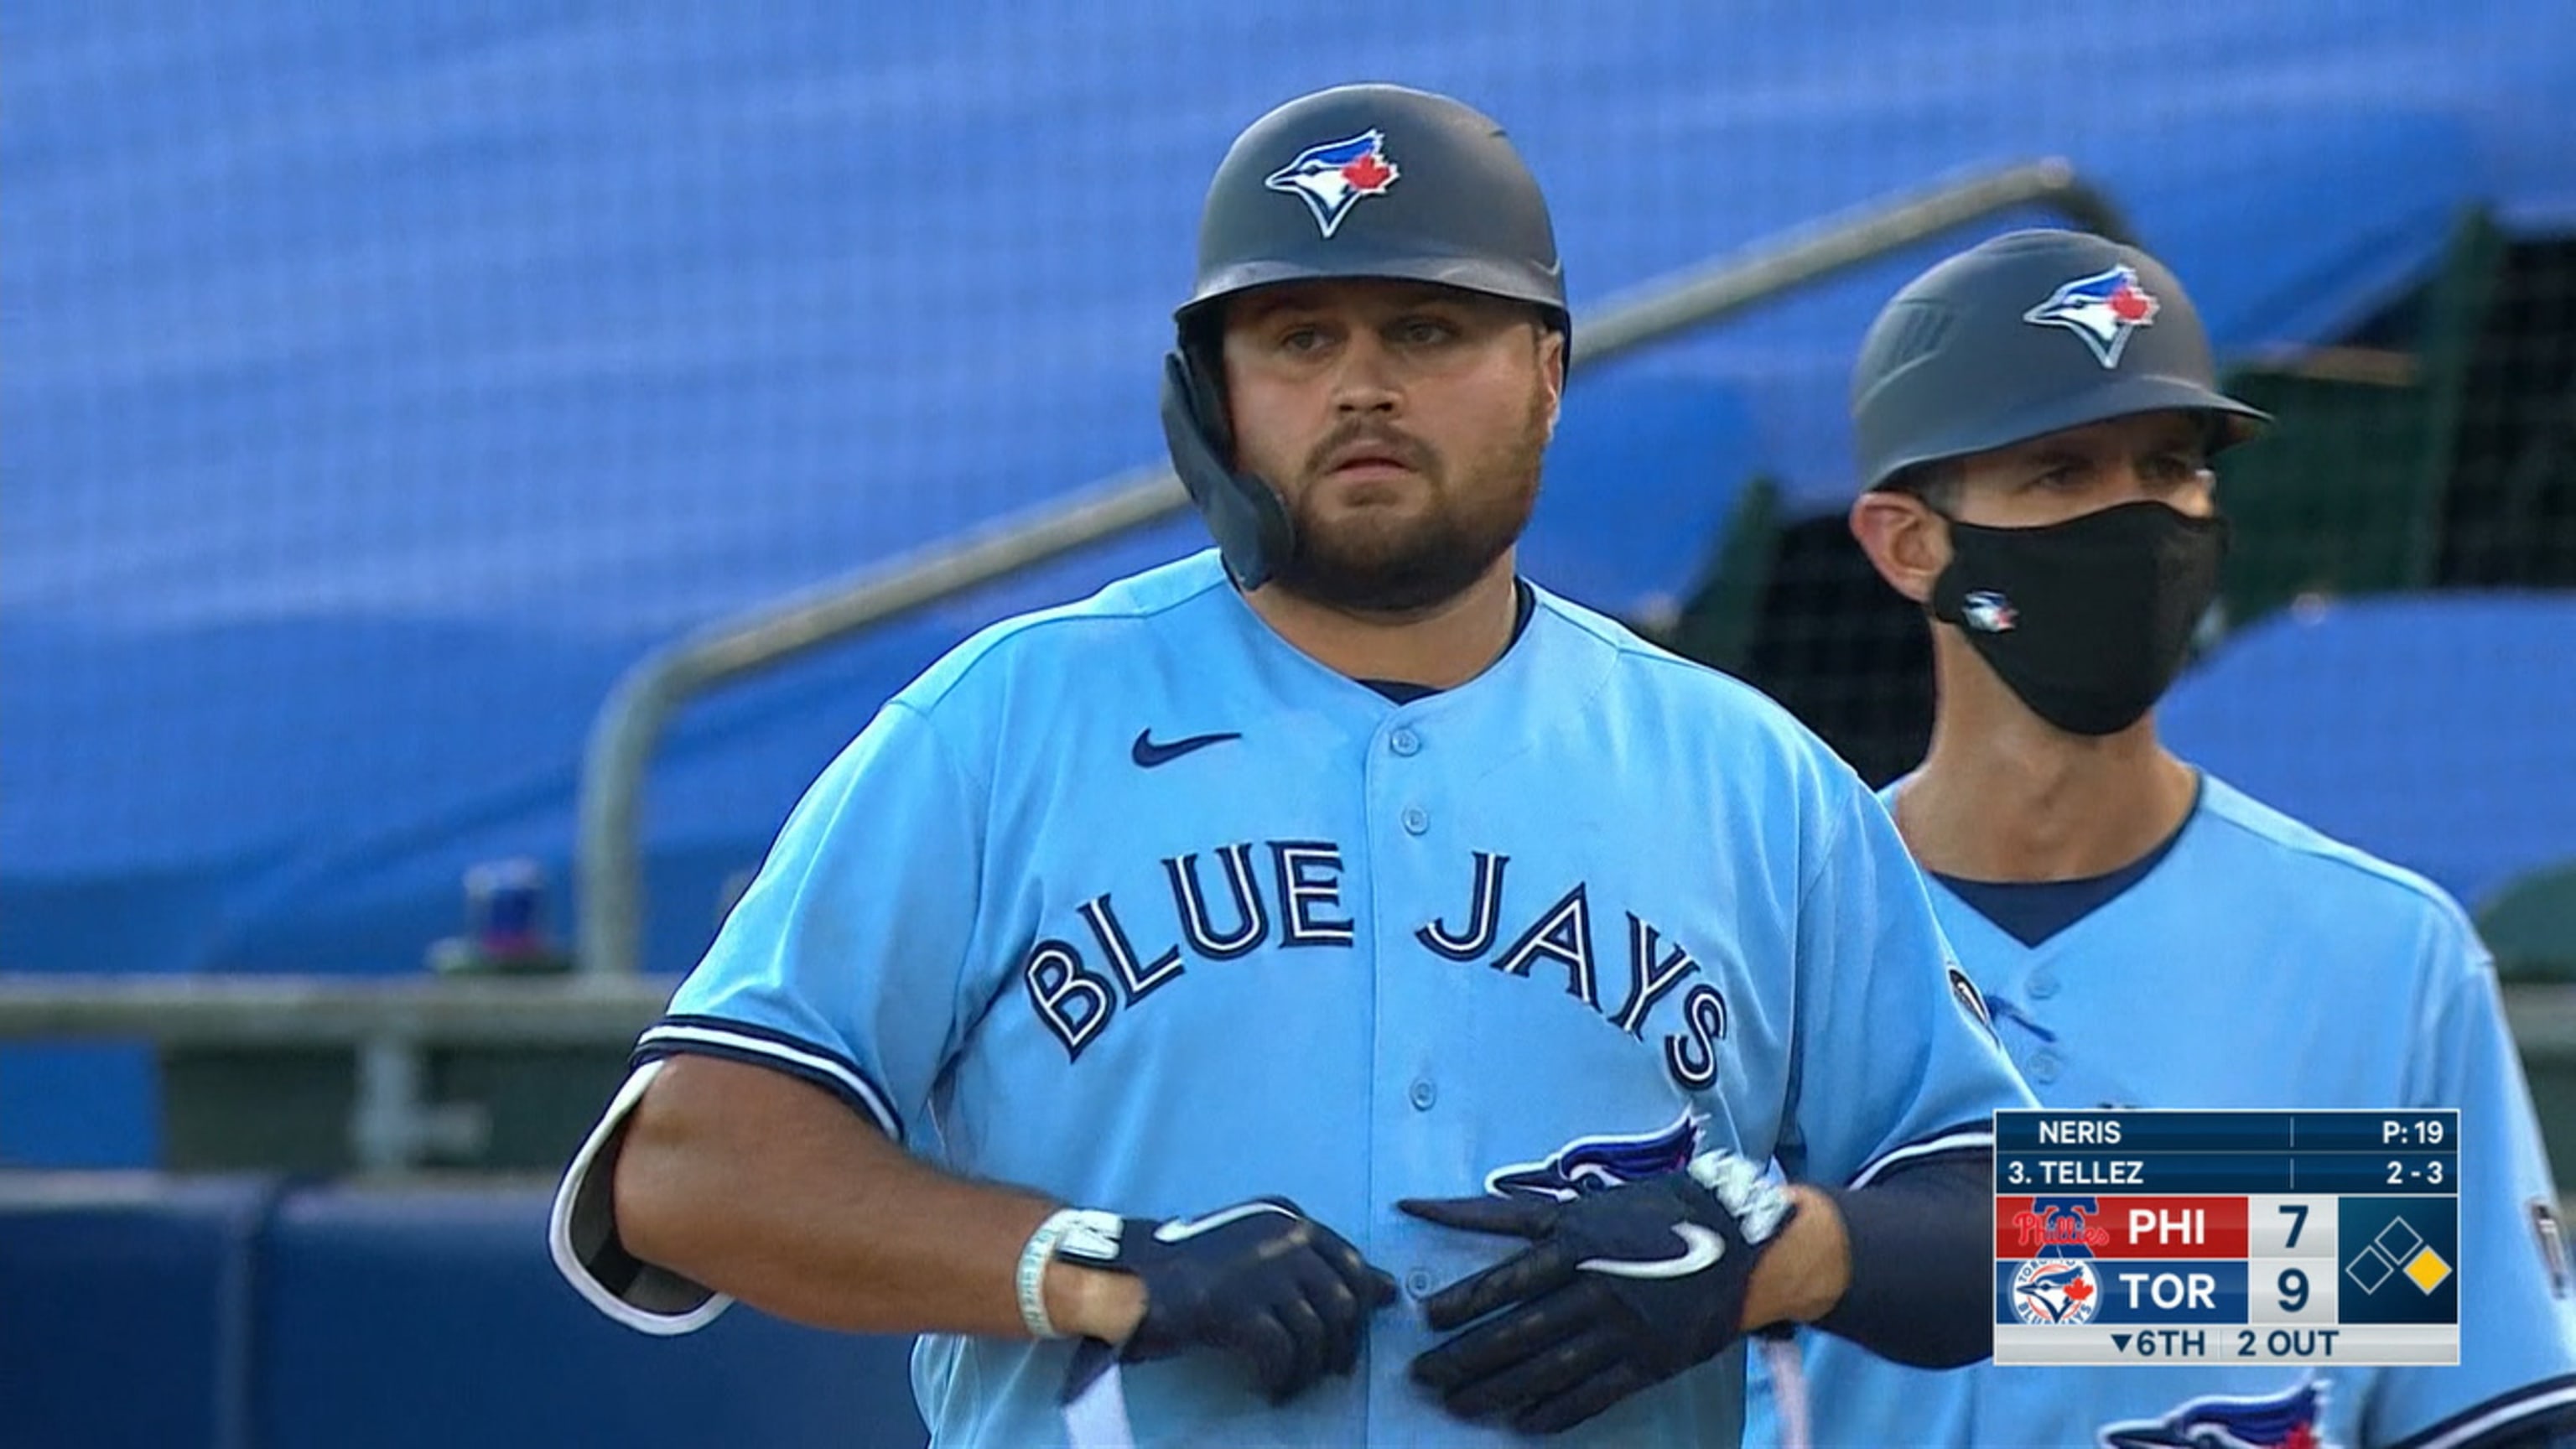 Rowdy Tellez talks about his big plays to help beat Rays.